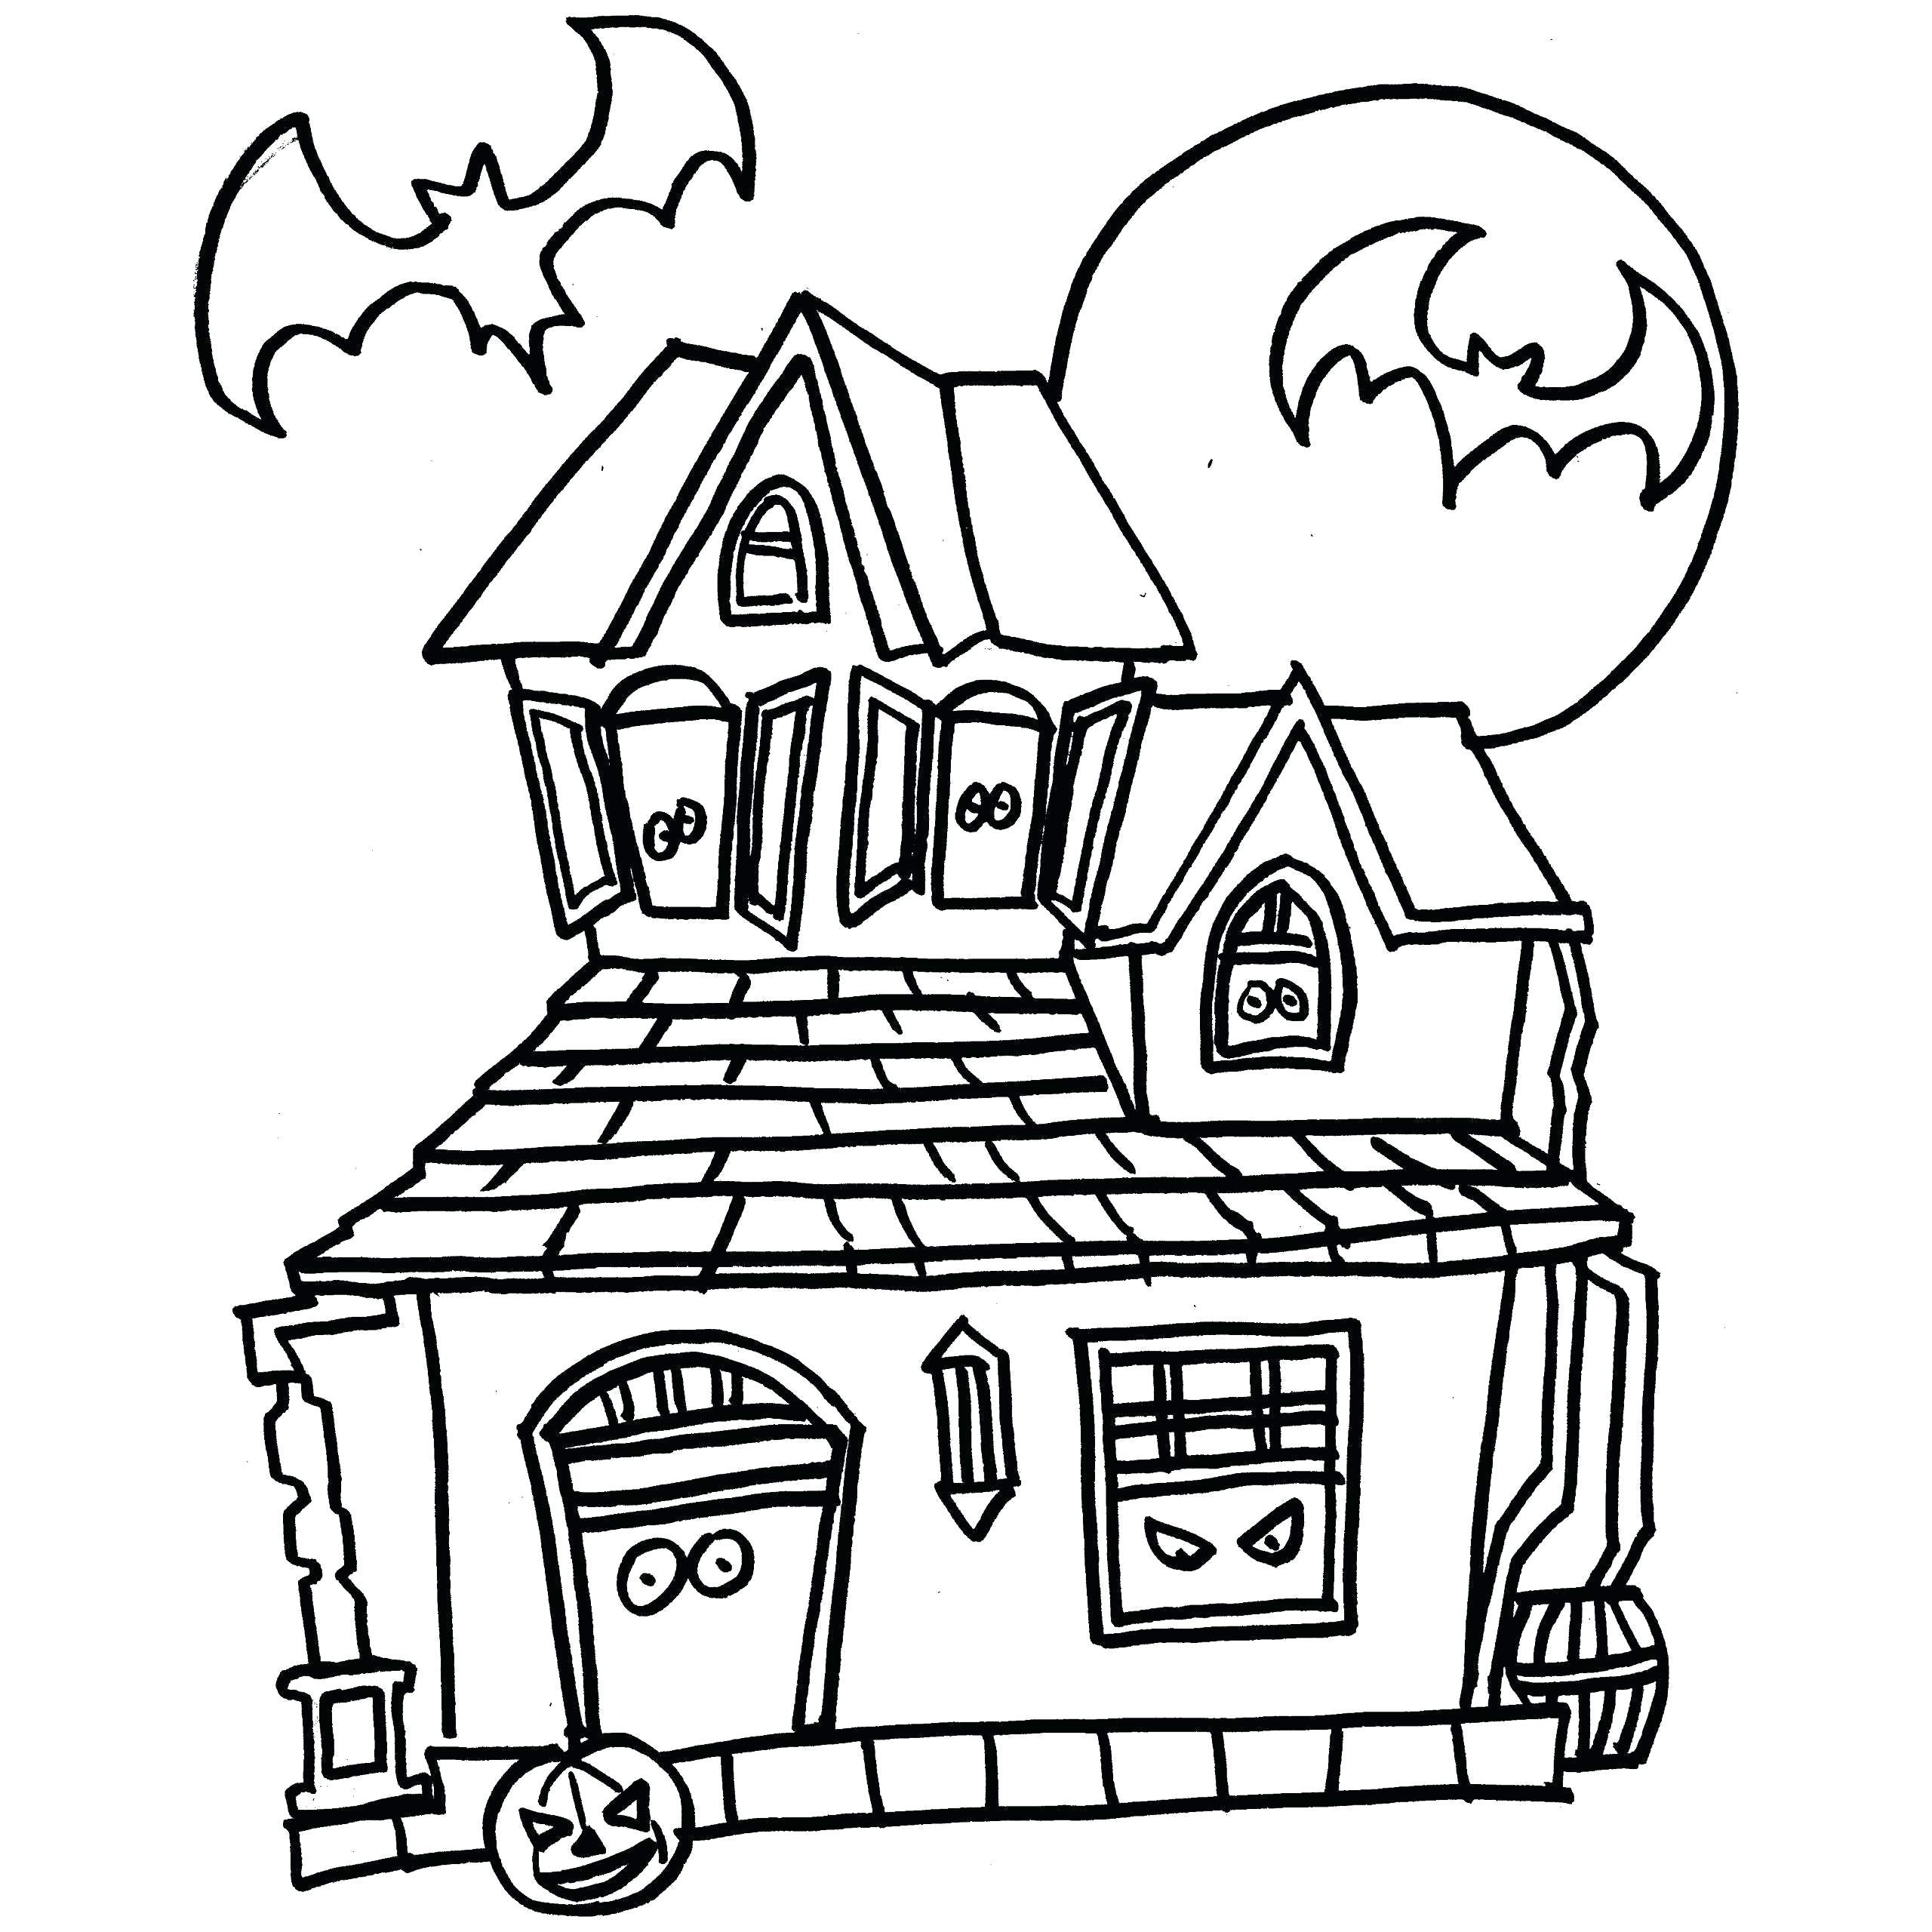 Halloween Frankenstein Coloring Pages Coloring Book Ideas Stunning Haunted House Coloring Pages Book